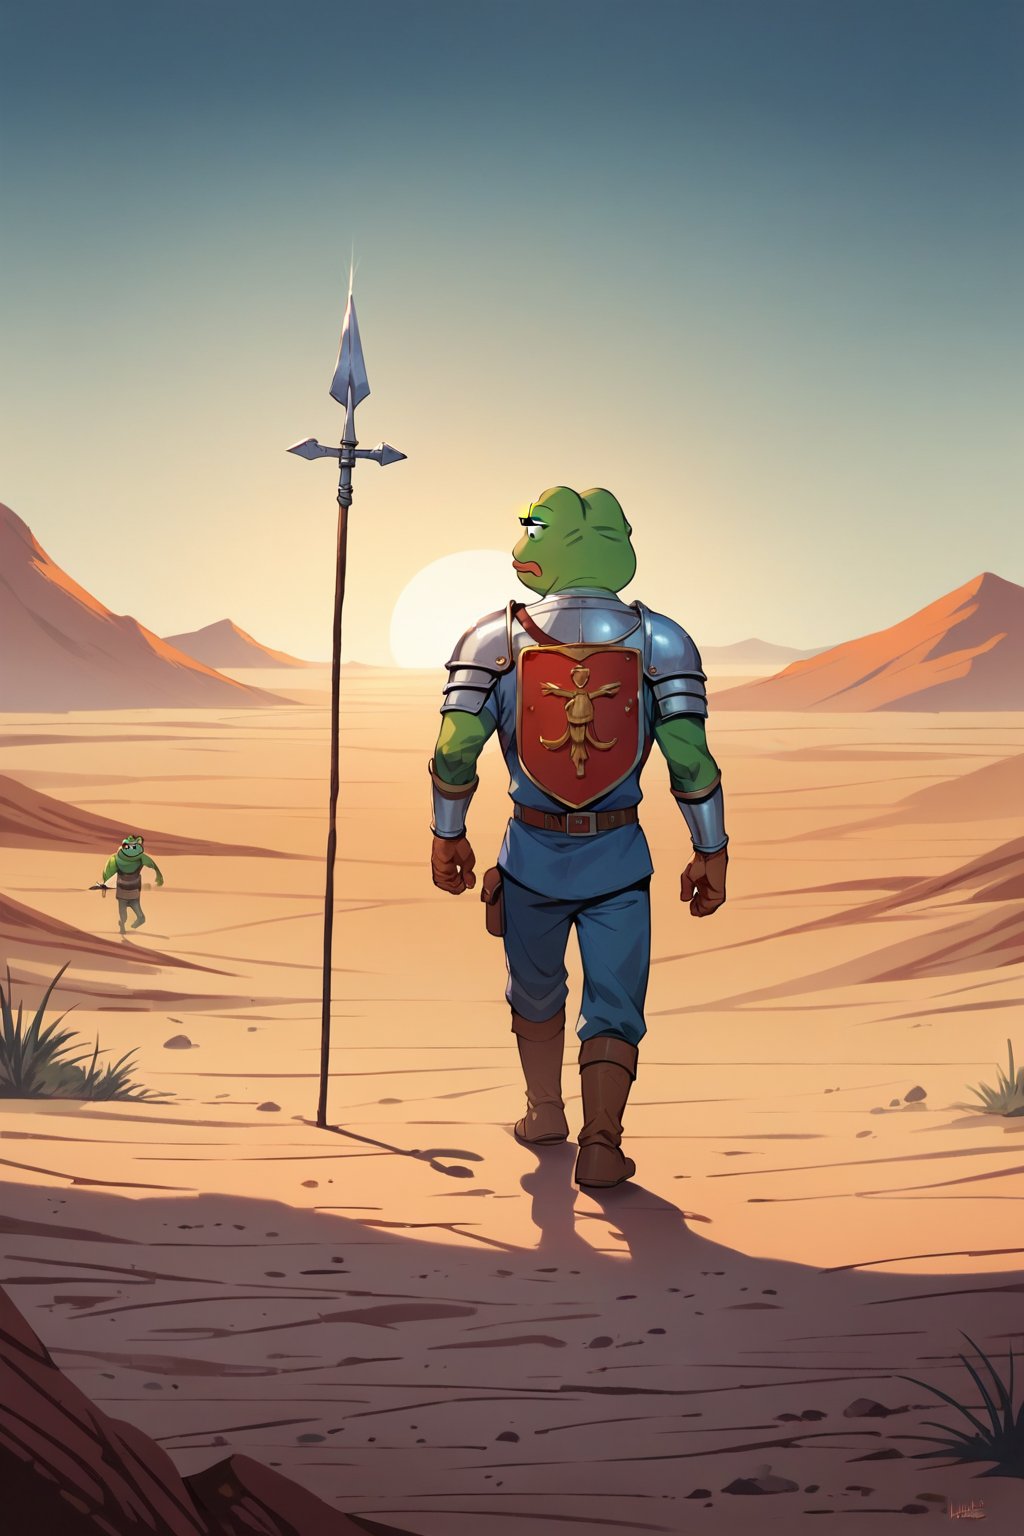 score_9, score_8, score_7, score_7_up, score_8_up, pepe the frog wearing Roman Armor(lorita hamaca, red color), with a spear and shield in hands, mojave desert, apocalyptic, walking, exterior, night